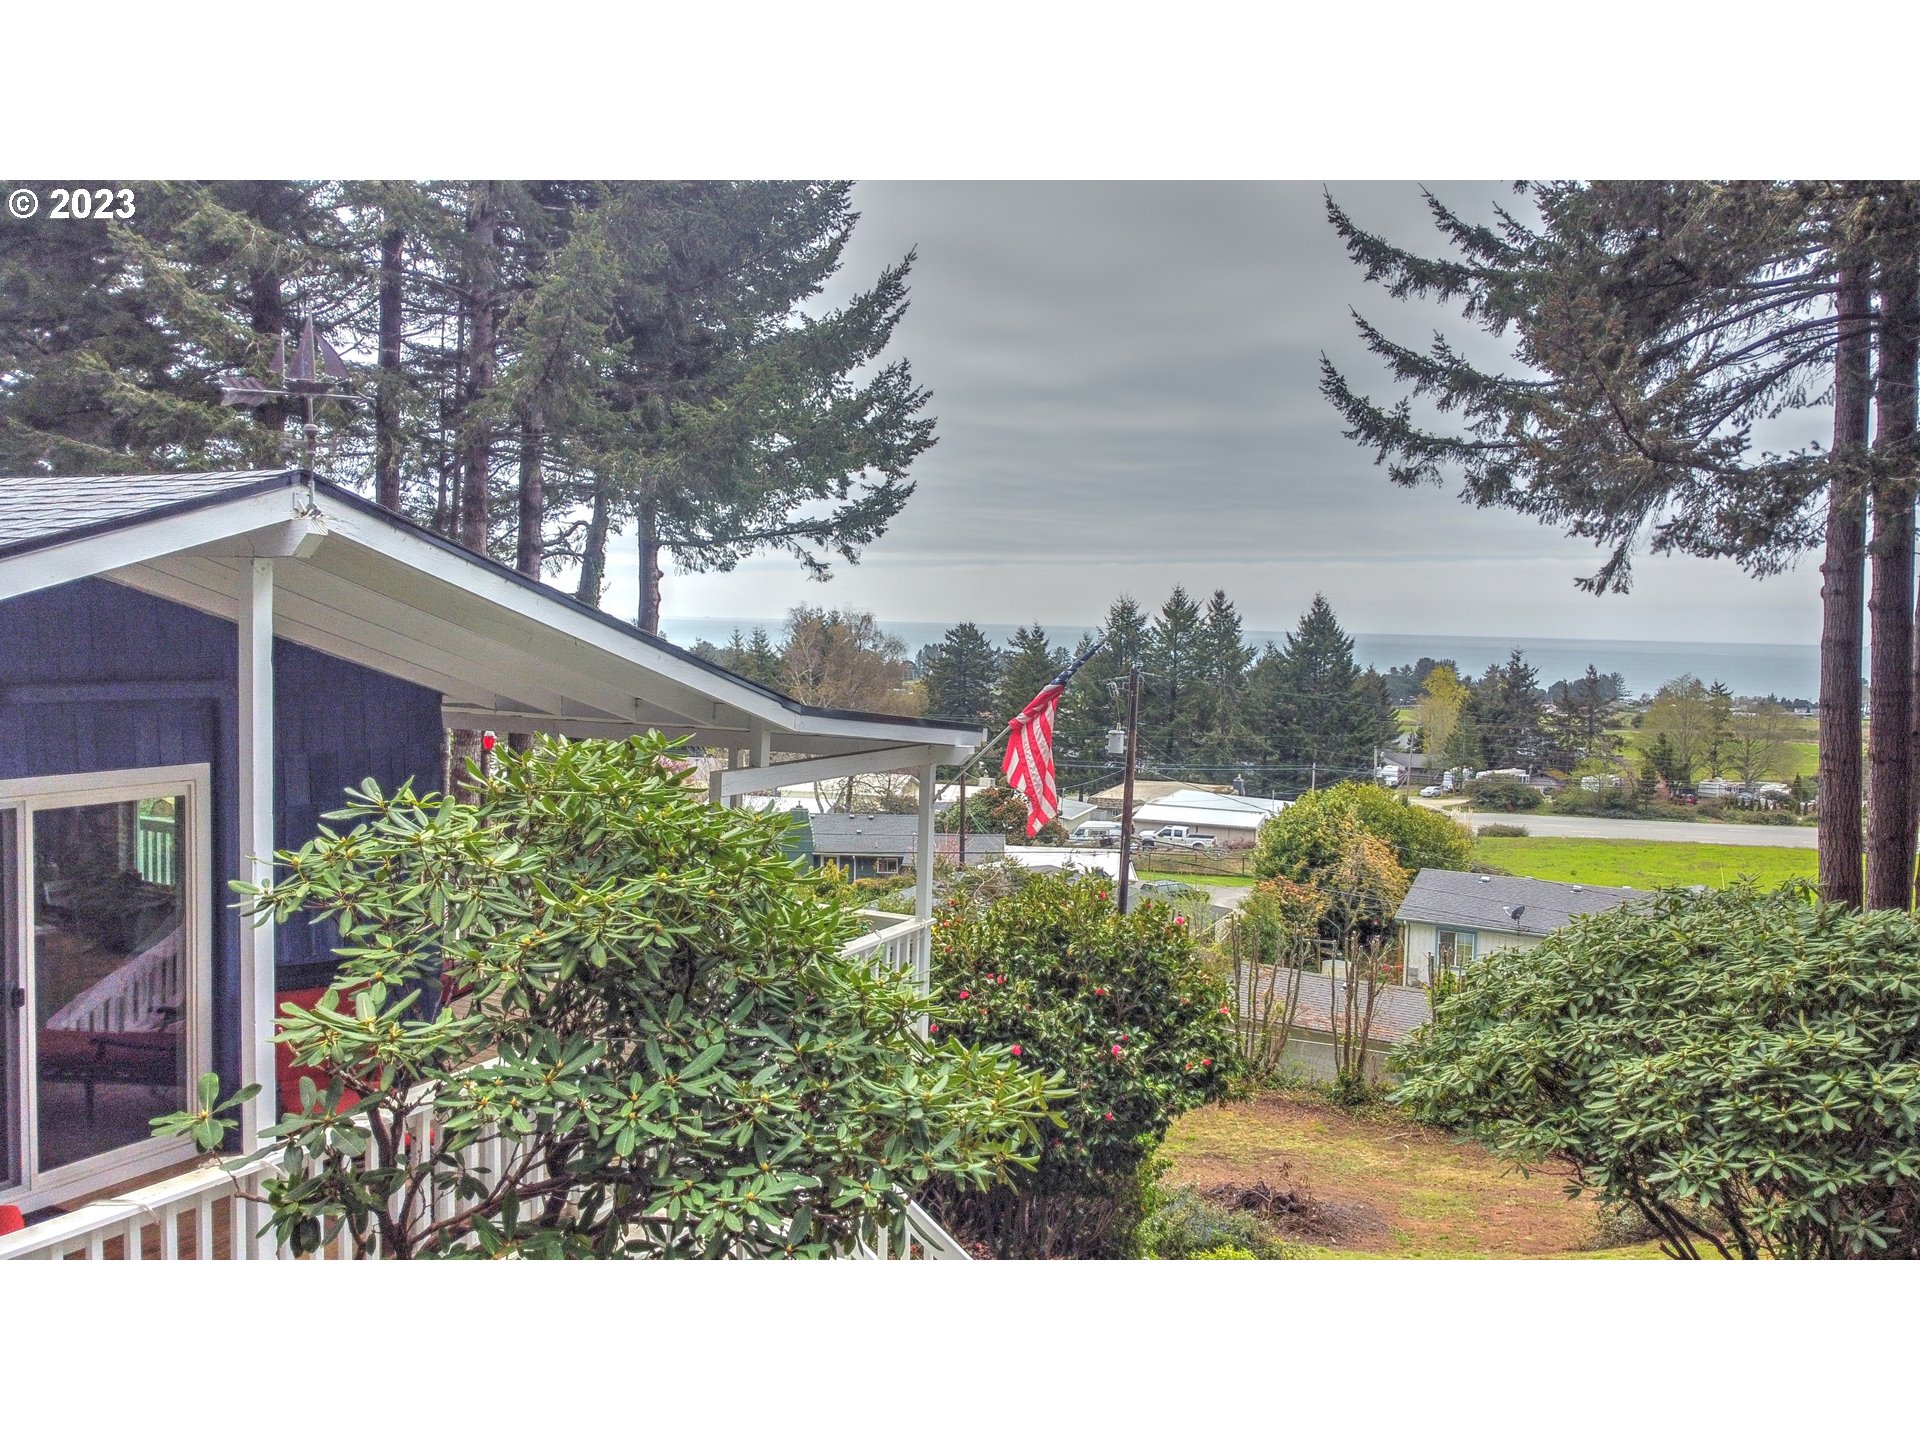 15908 PELICAN BAY DR Gold Beach, Brookings Home Listings - Pacific Coastal Real Estate